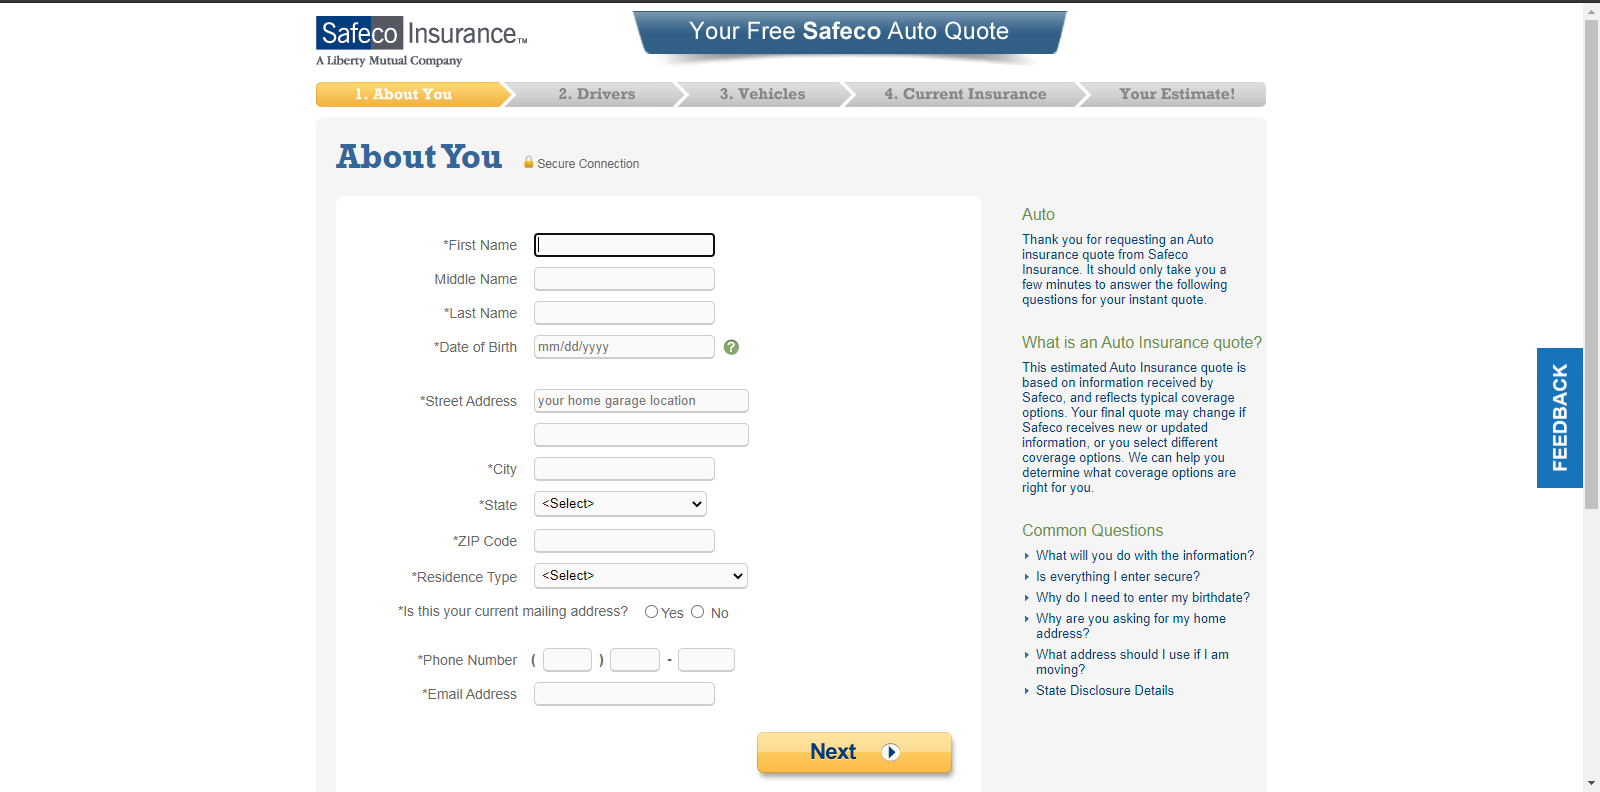 Safeco car insurance Review 2021 | The Smart Investor